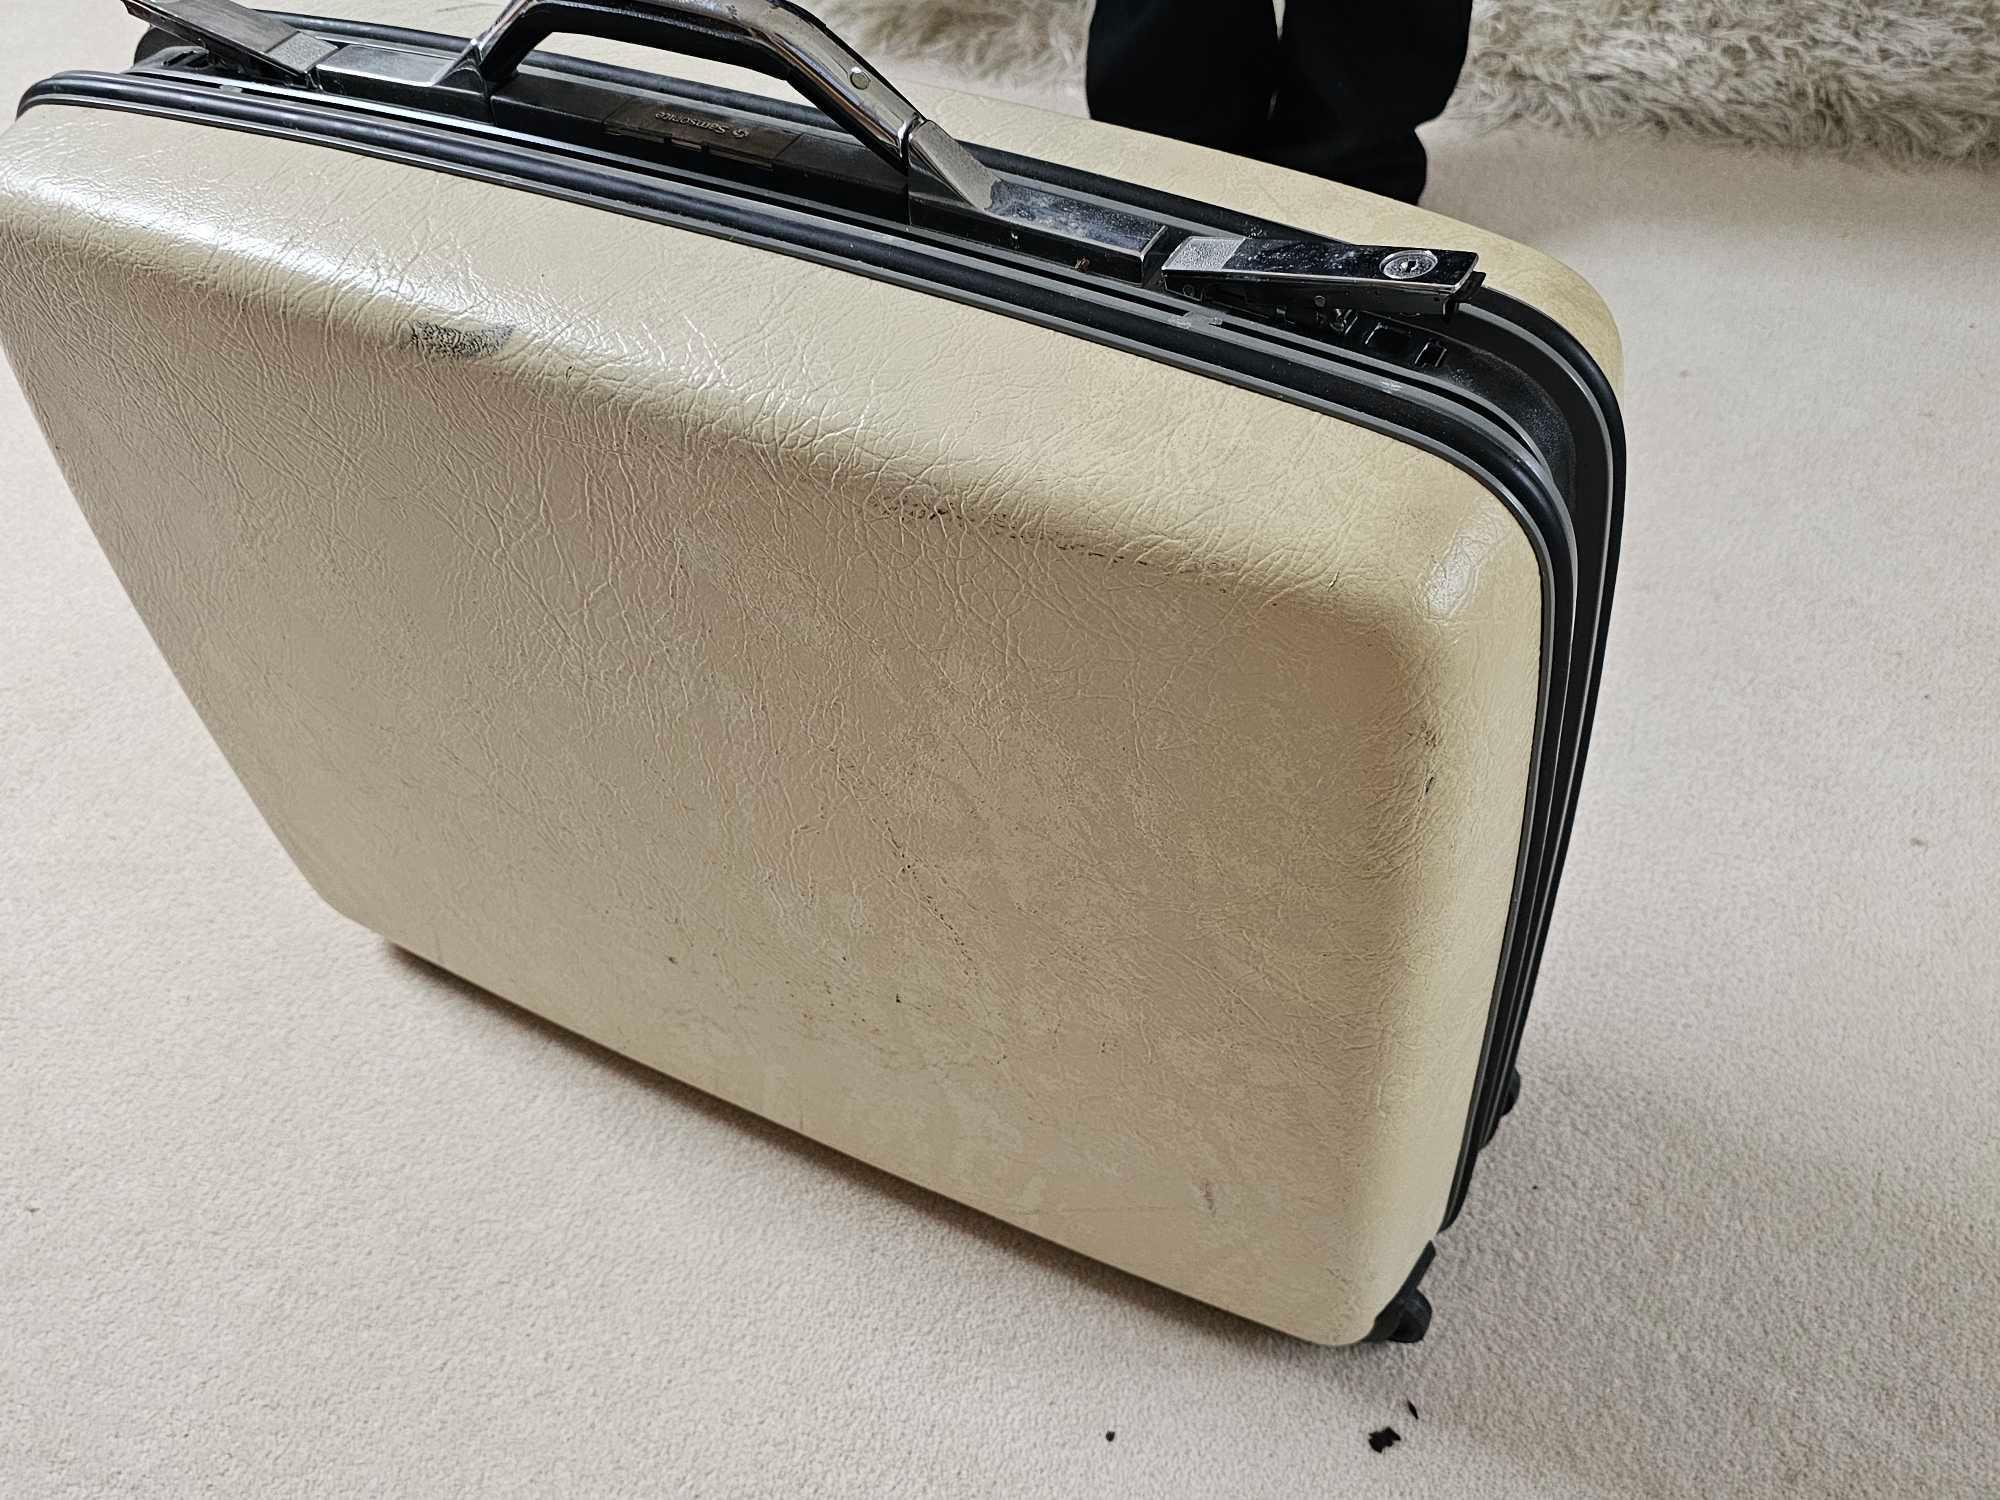 A Vintage 1960s Samsonite Silhouette Hard Shell Luggage Suitcase With Liner Intact - Image 3 of 4